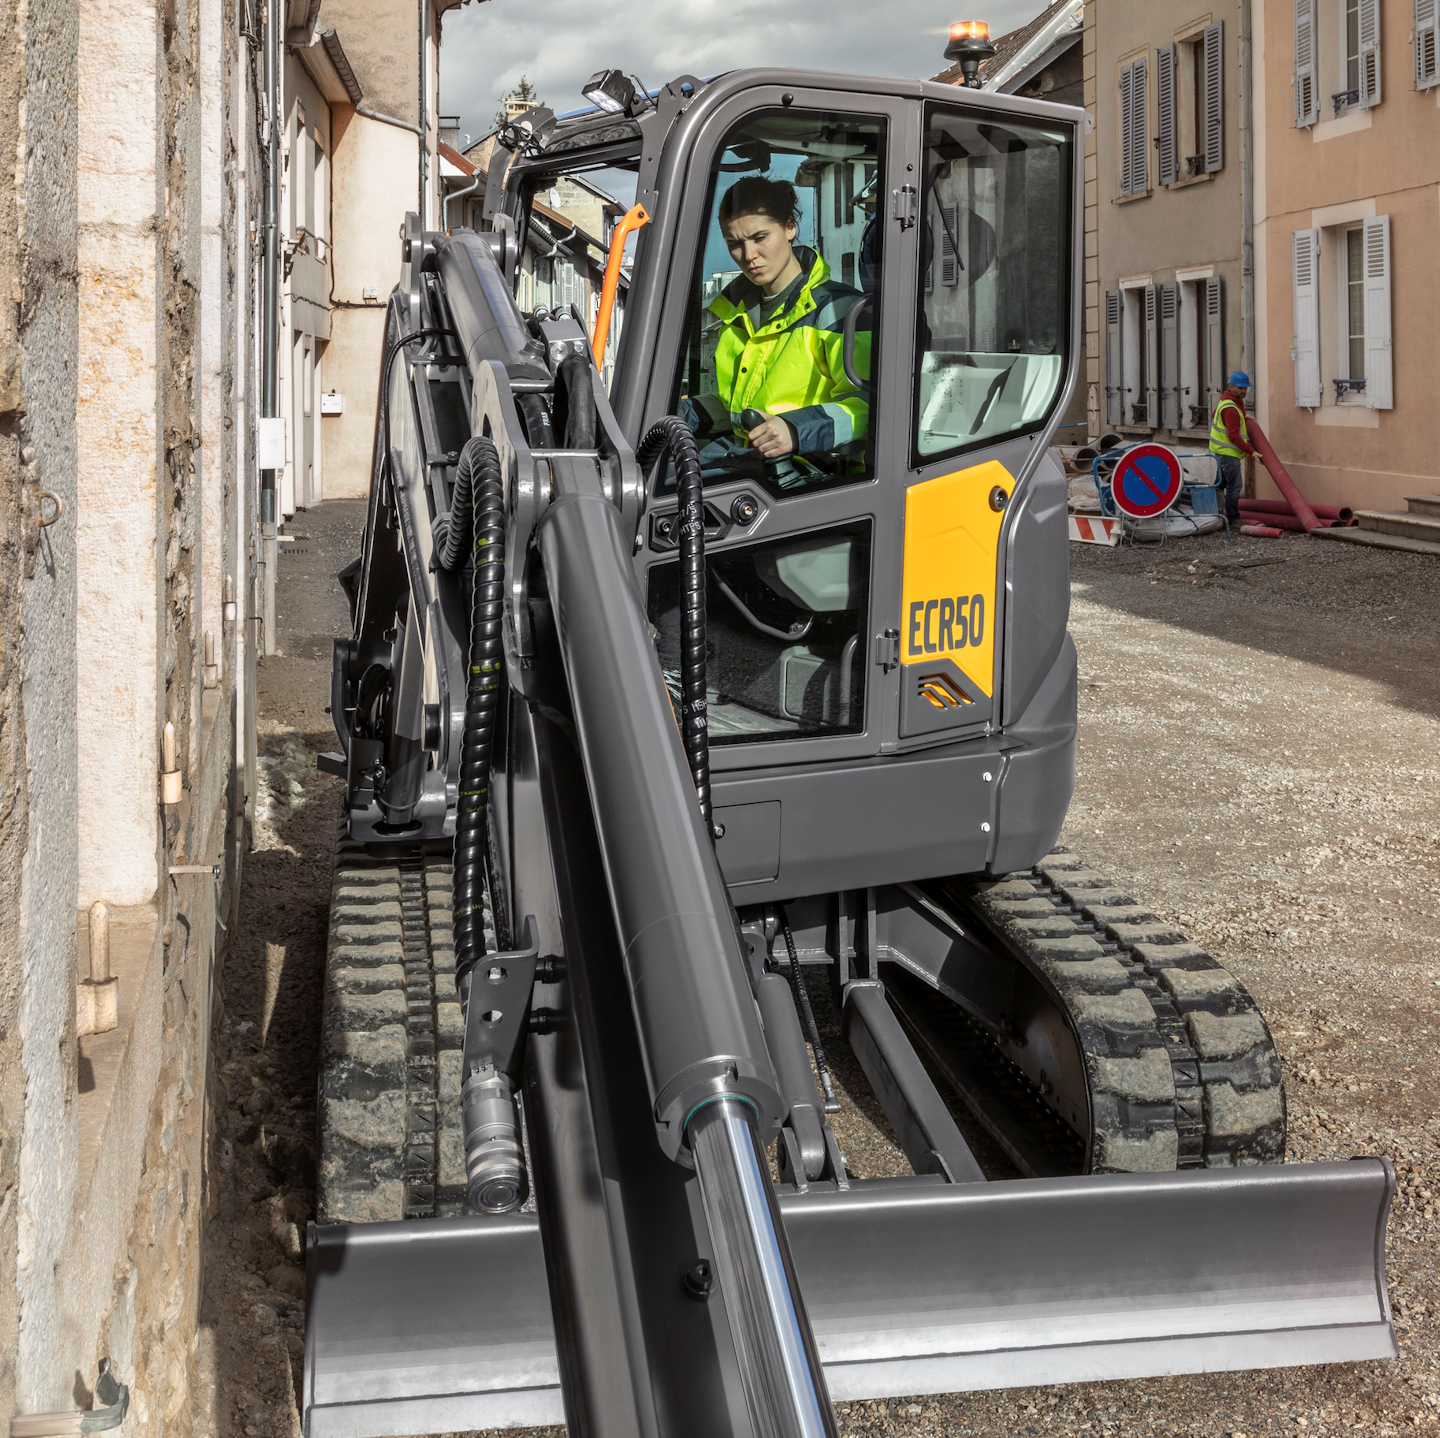 Volvo ECR50 compact excavator in use